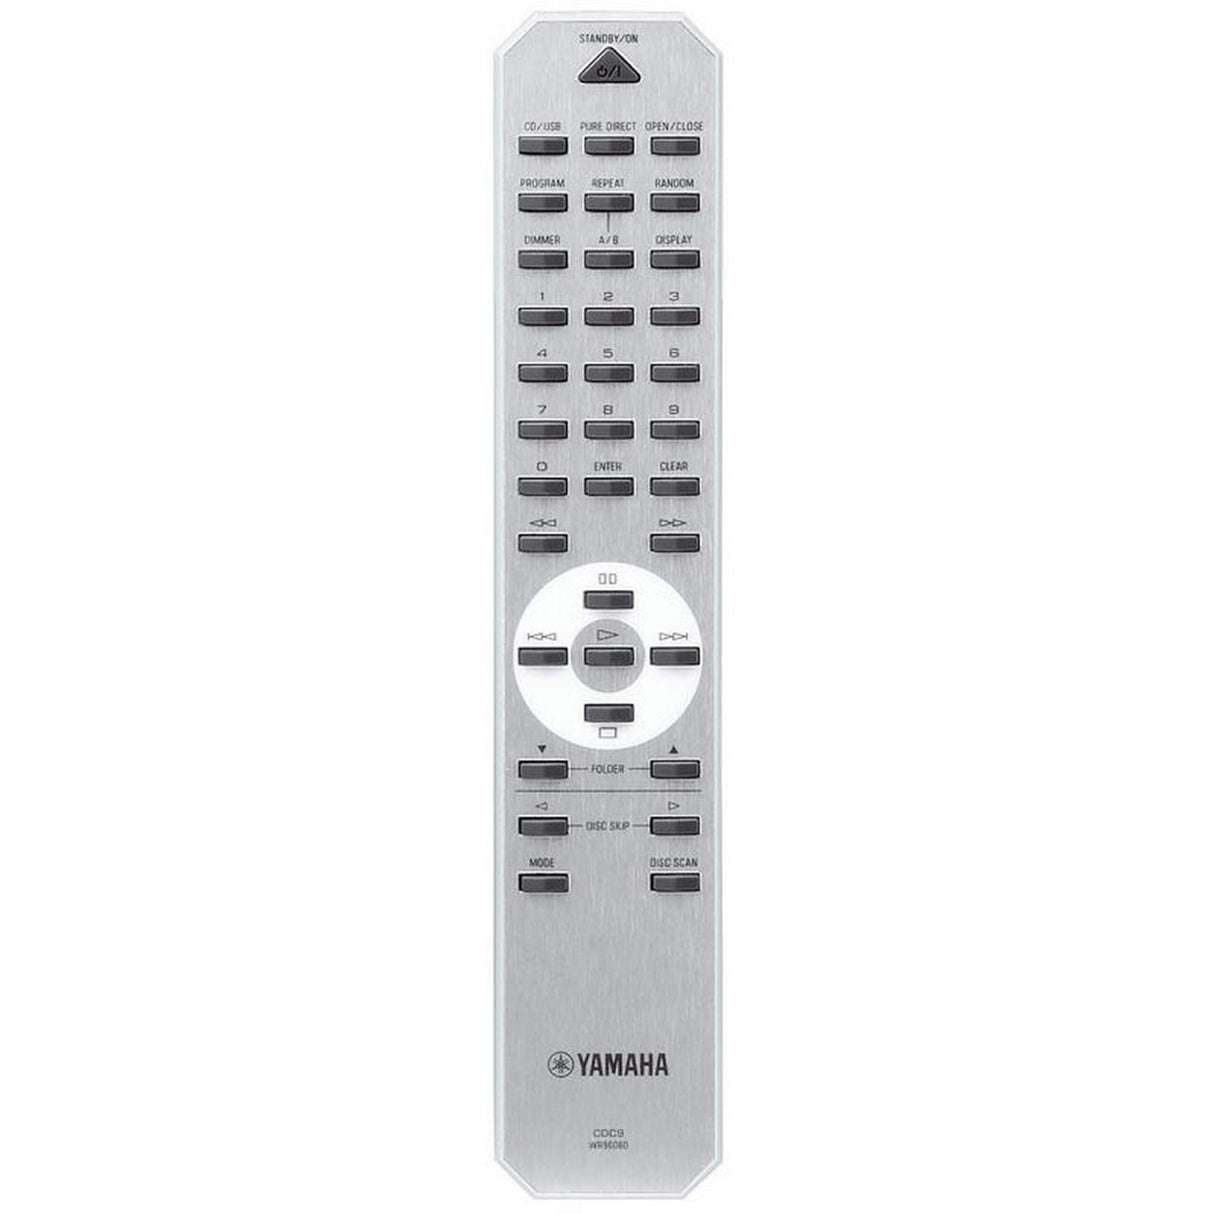 Yamaha WR960600 Remote Control for CD-C600